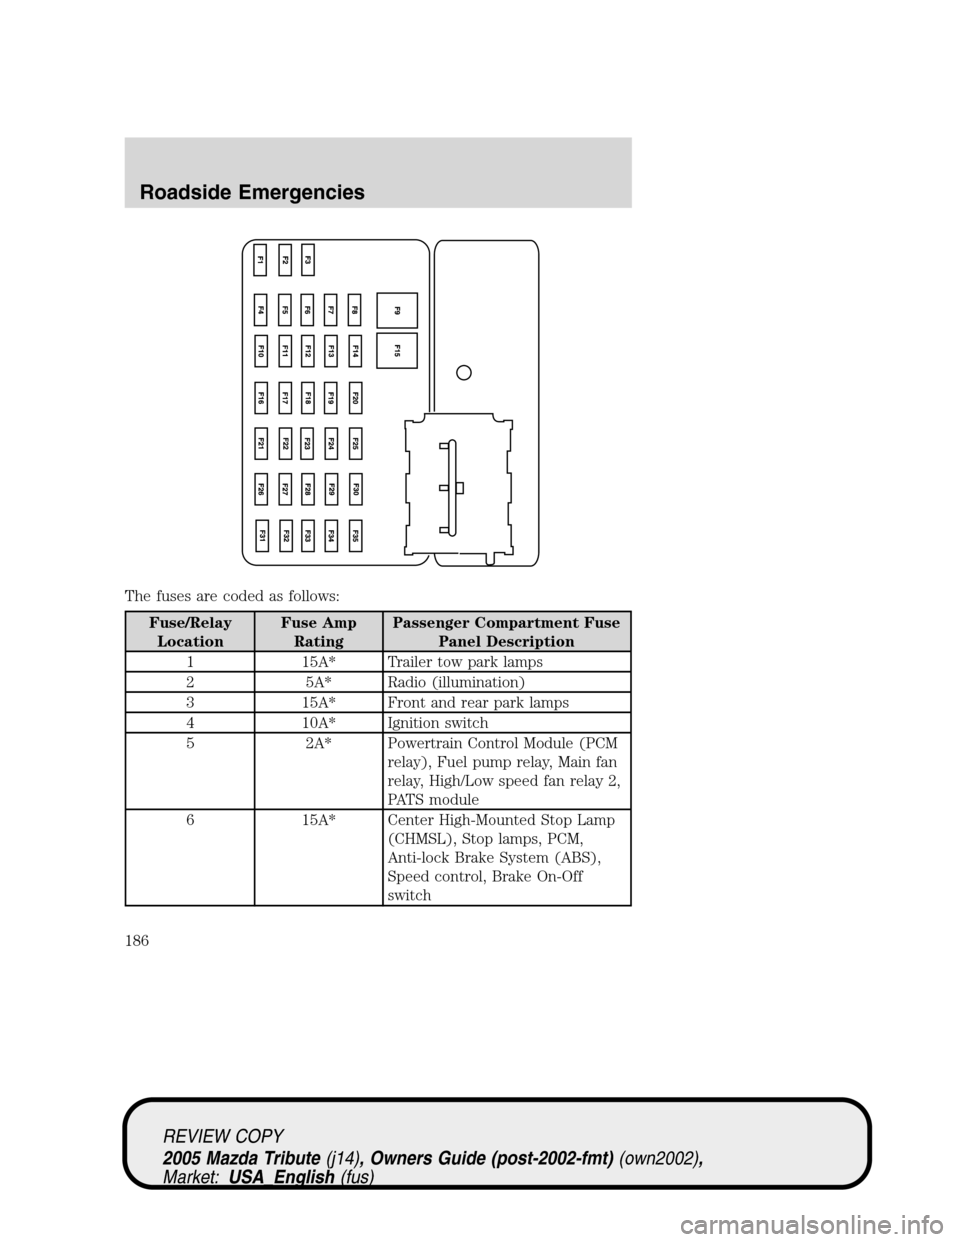 MAZDA MODEL TRIBUTE 2005  Owners Manual (in English) The fuses are coded as follows:
Fuse/Relay
LocationFuse Amp
RatingPassenger Compartment Fuse
Panel Description
1 15A* Trailer tow park lamps
2 5A* Radio (illumination)
3 15A* Front and rear park lamps